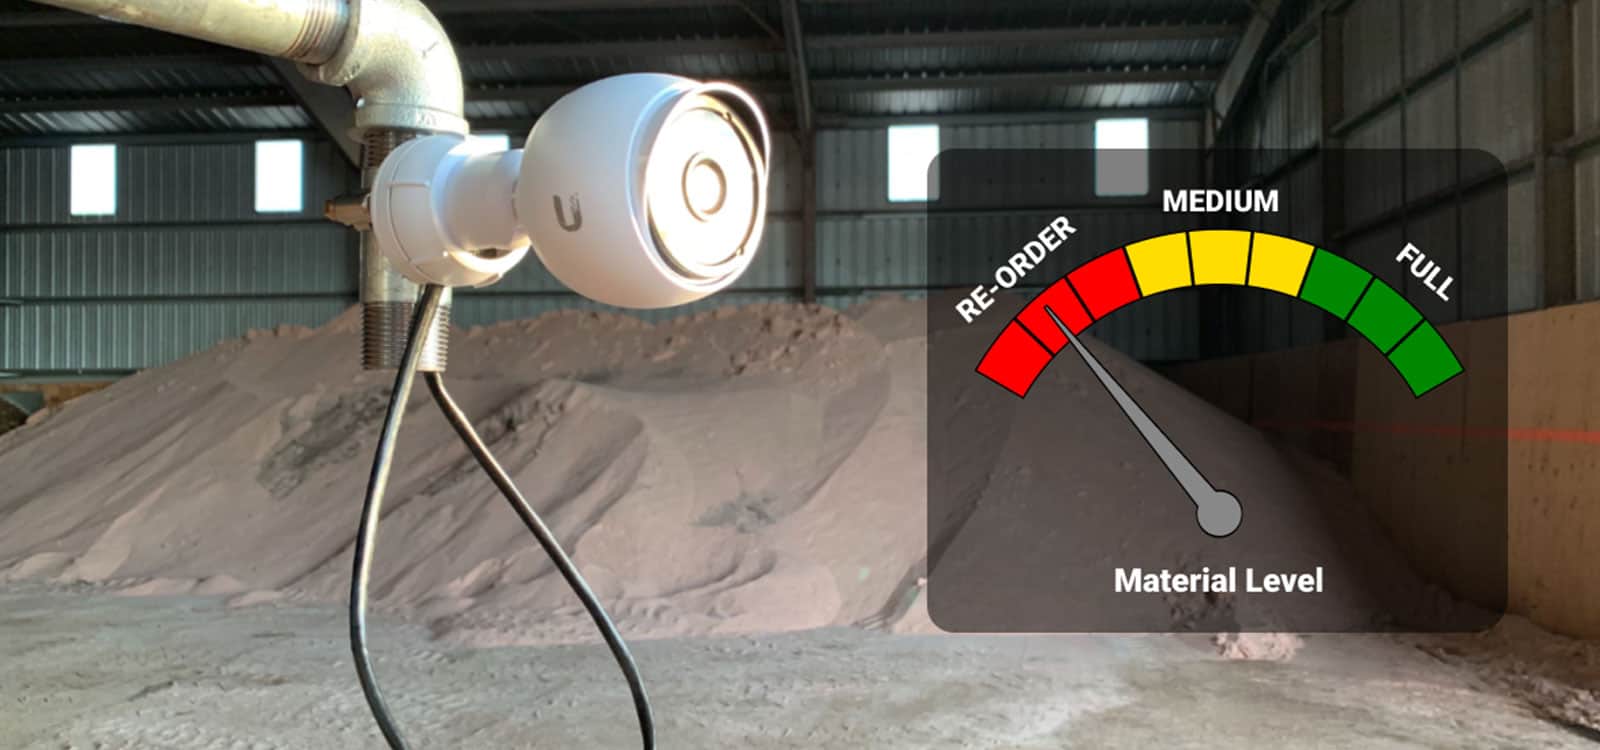 Stockpile Reports® for Logistics Generates Inventory Levels From Low-Cost Fixed Cameras